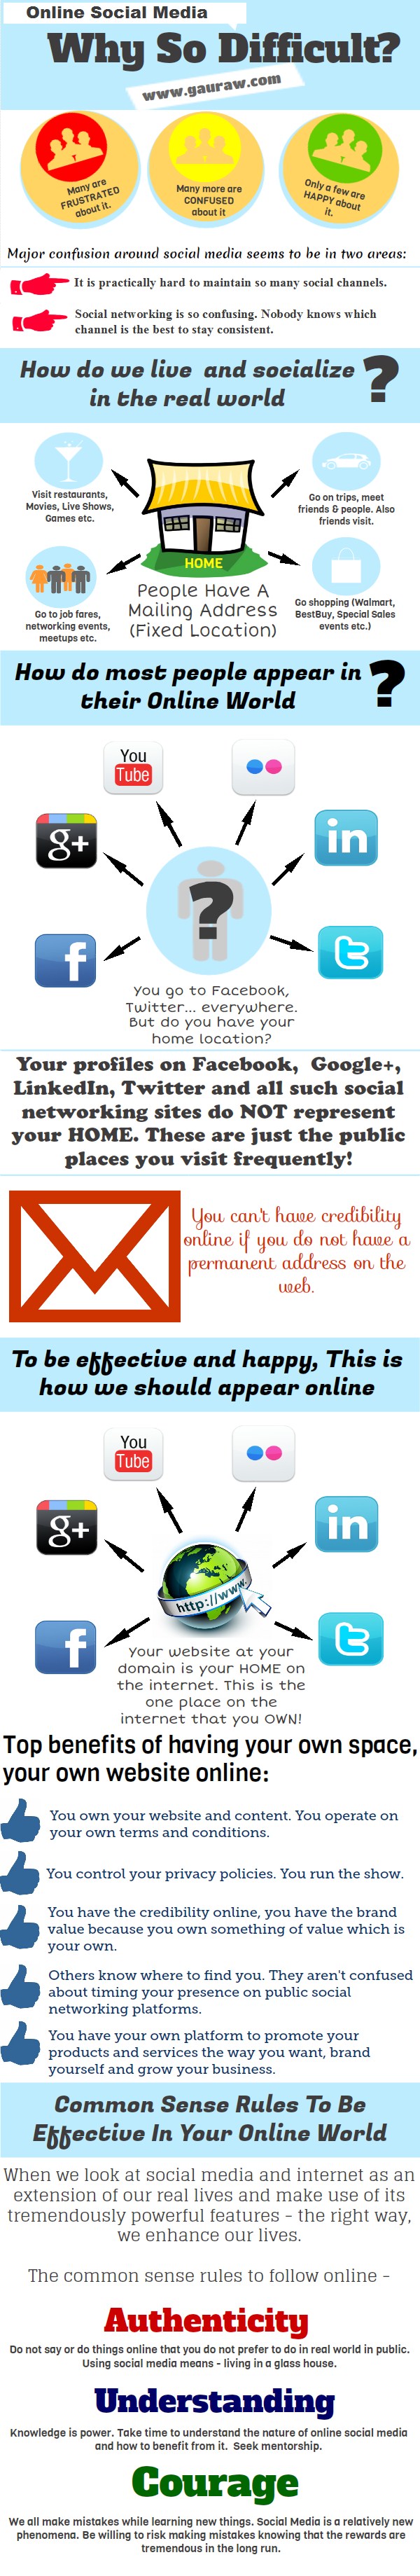 Infographics - Using Social Media and Social Networking Effectively For Personal and Professional Success